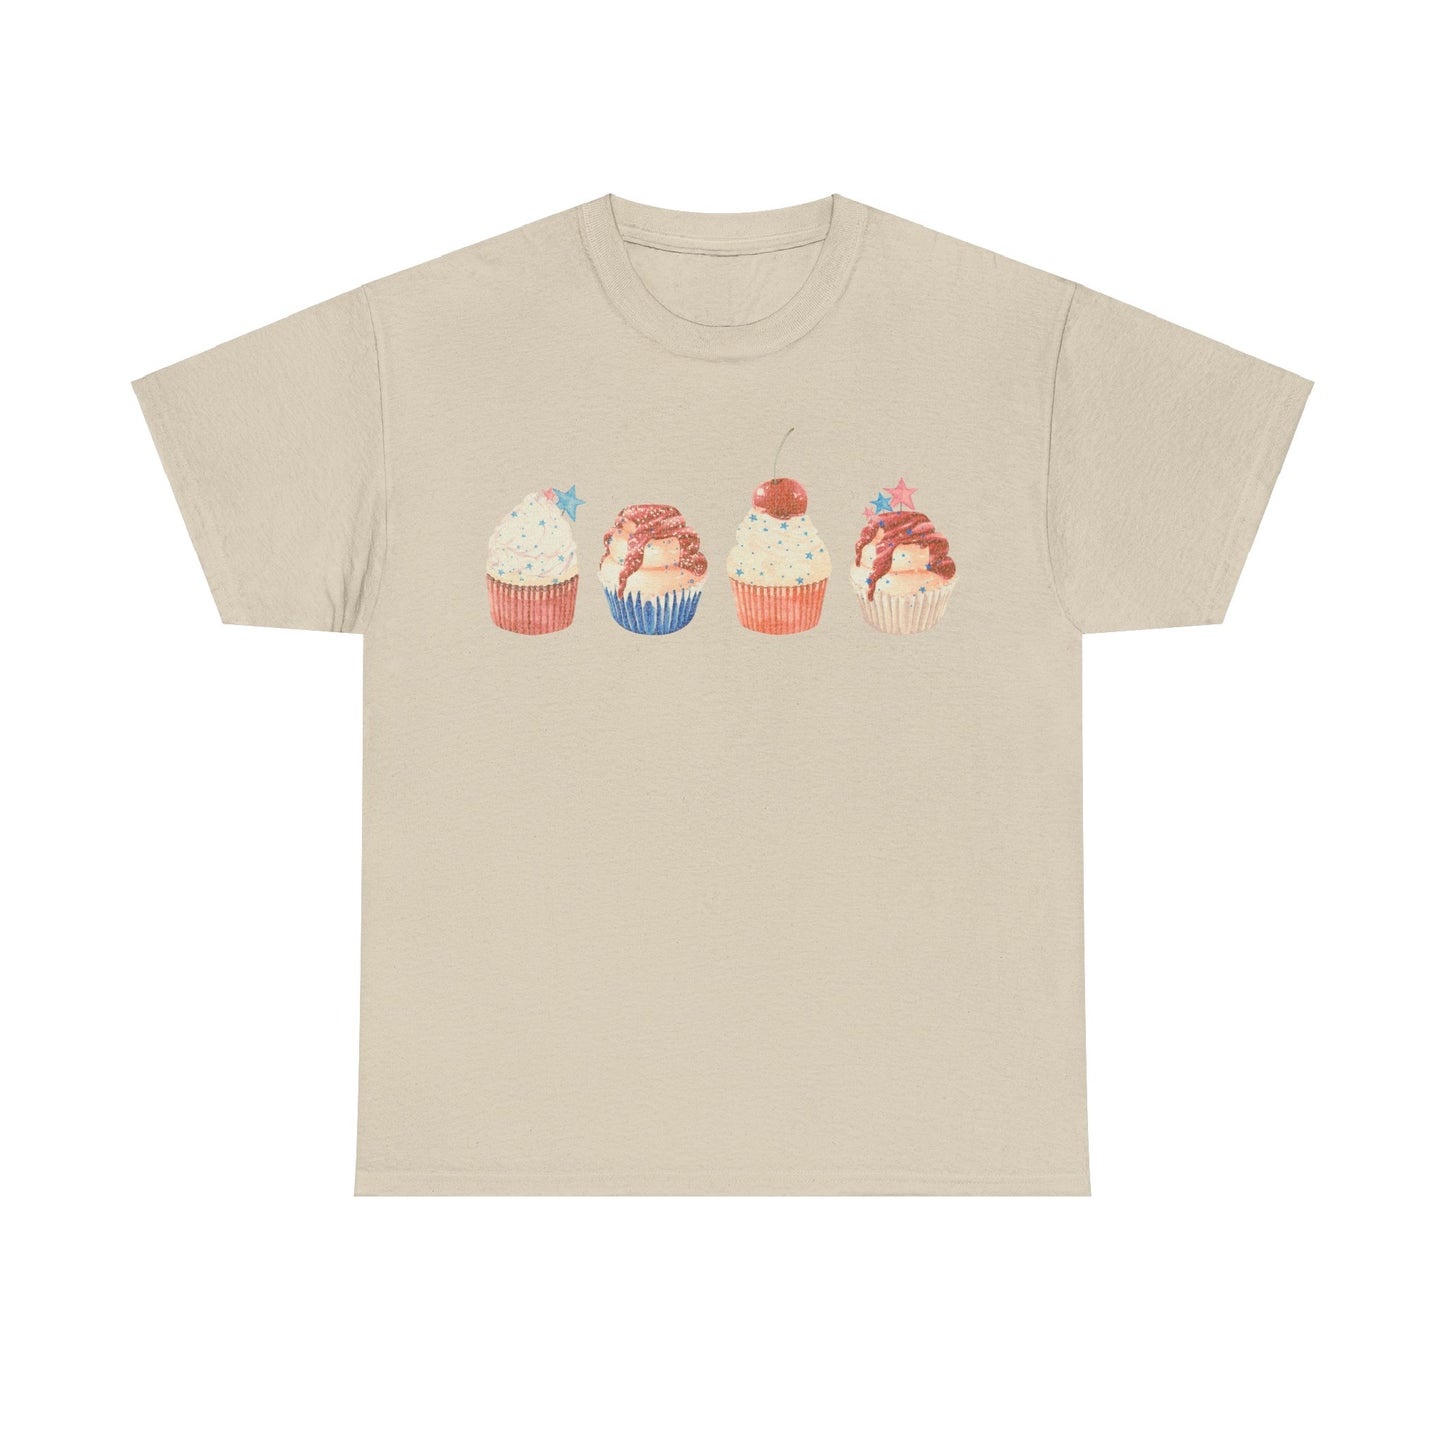 Fourth of July Cupcakes - Unisex T-Shirt